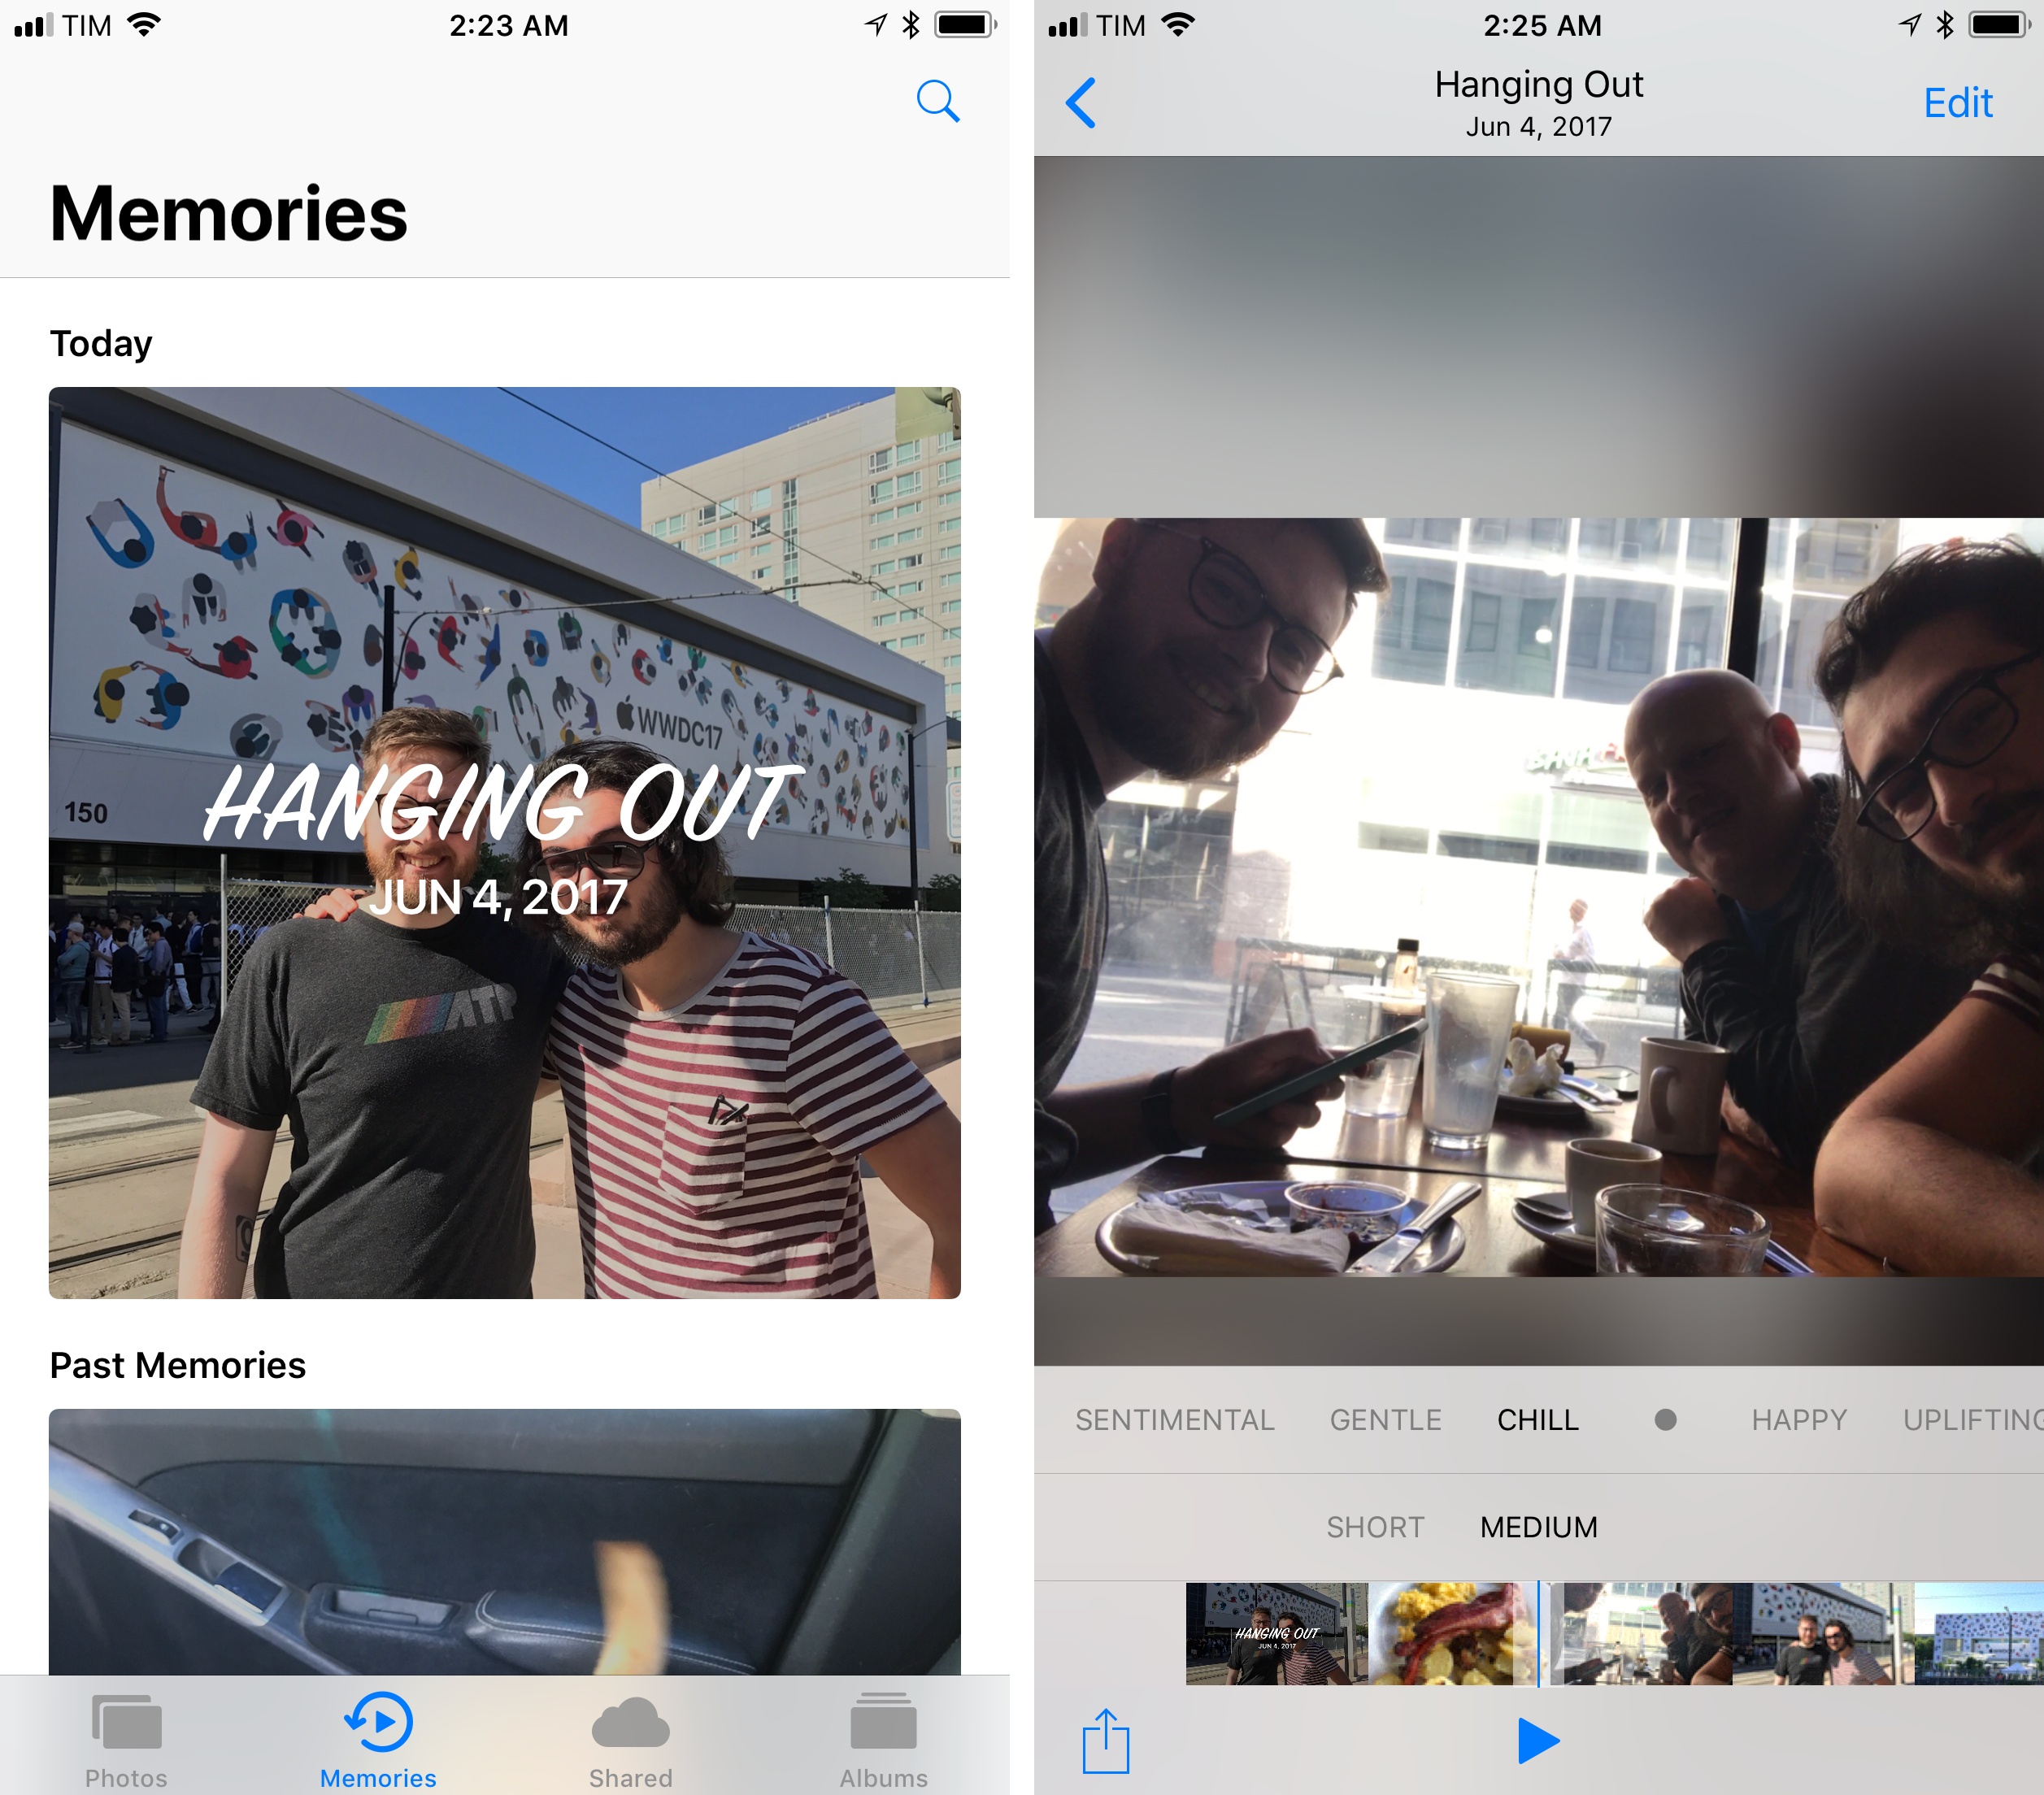 Memory Movies are now optimized for portrait mode.